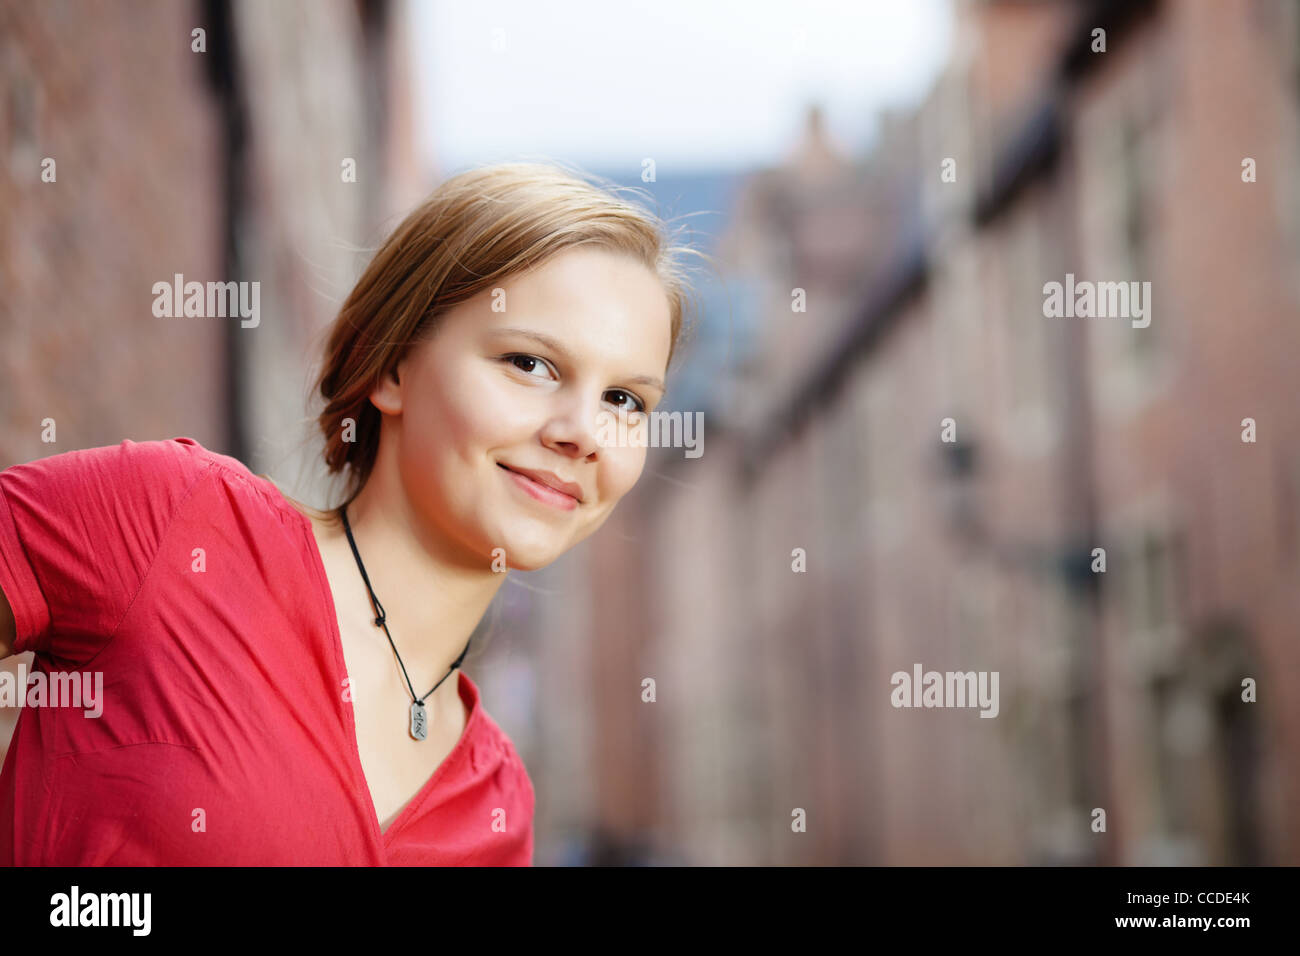 Happy young woman photographed in a city street Stock Photo